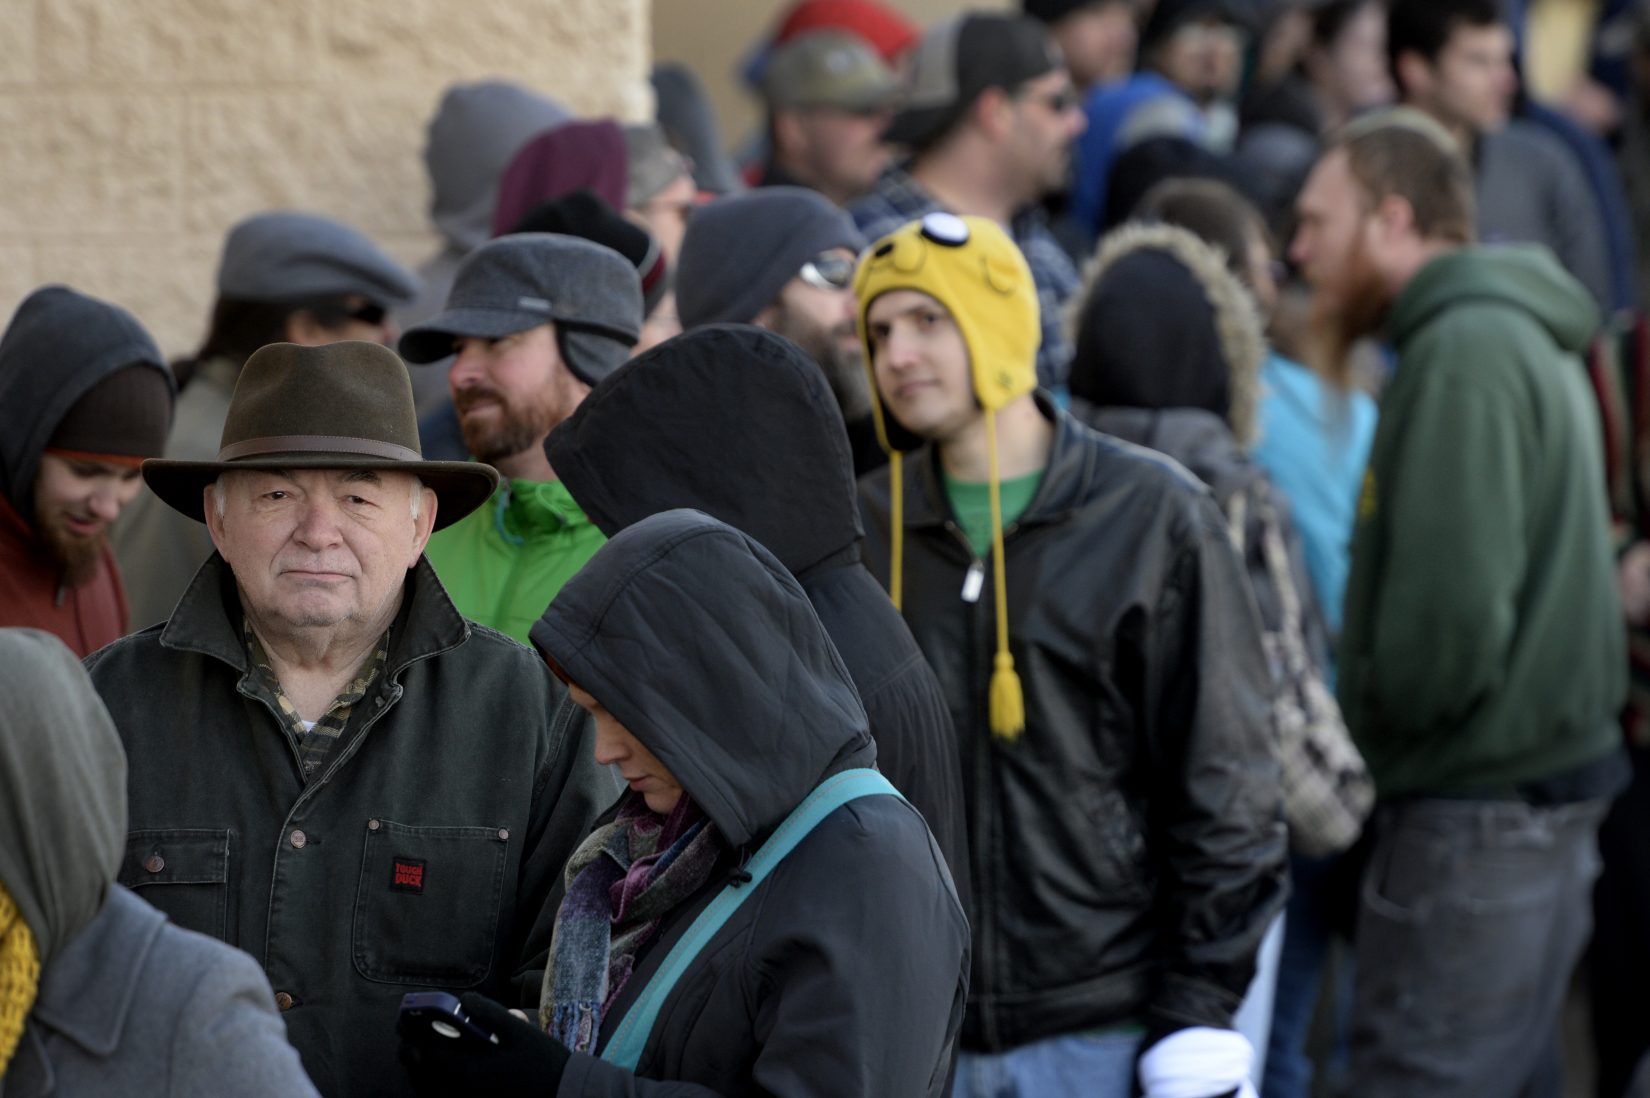 A line formed around a Colorado recreational marijuana shop in opening week.